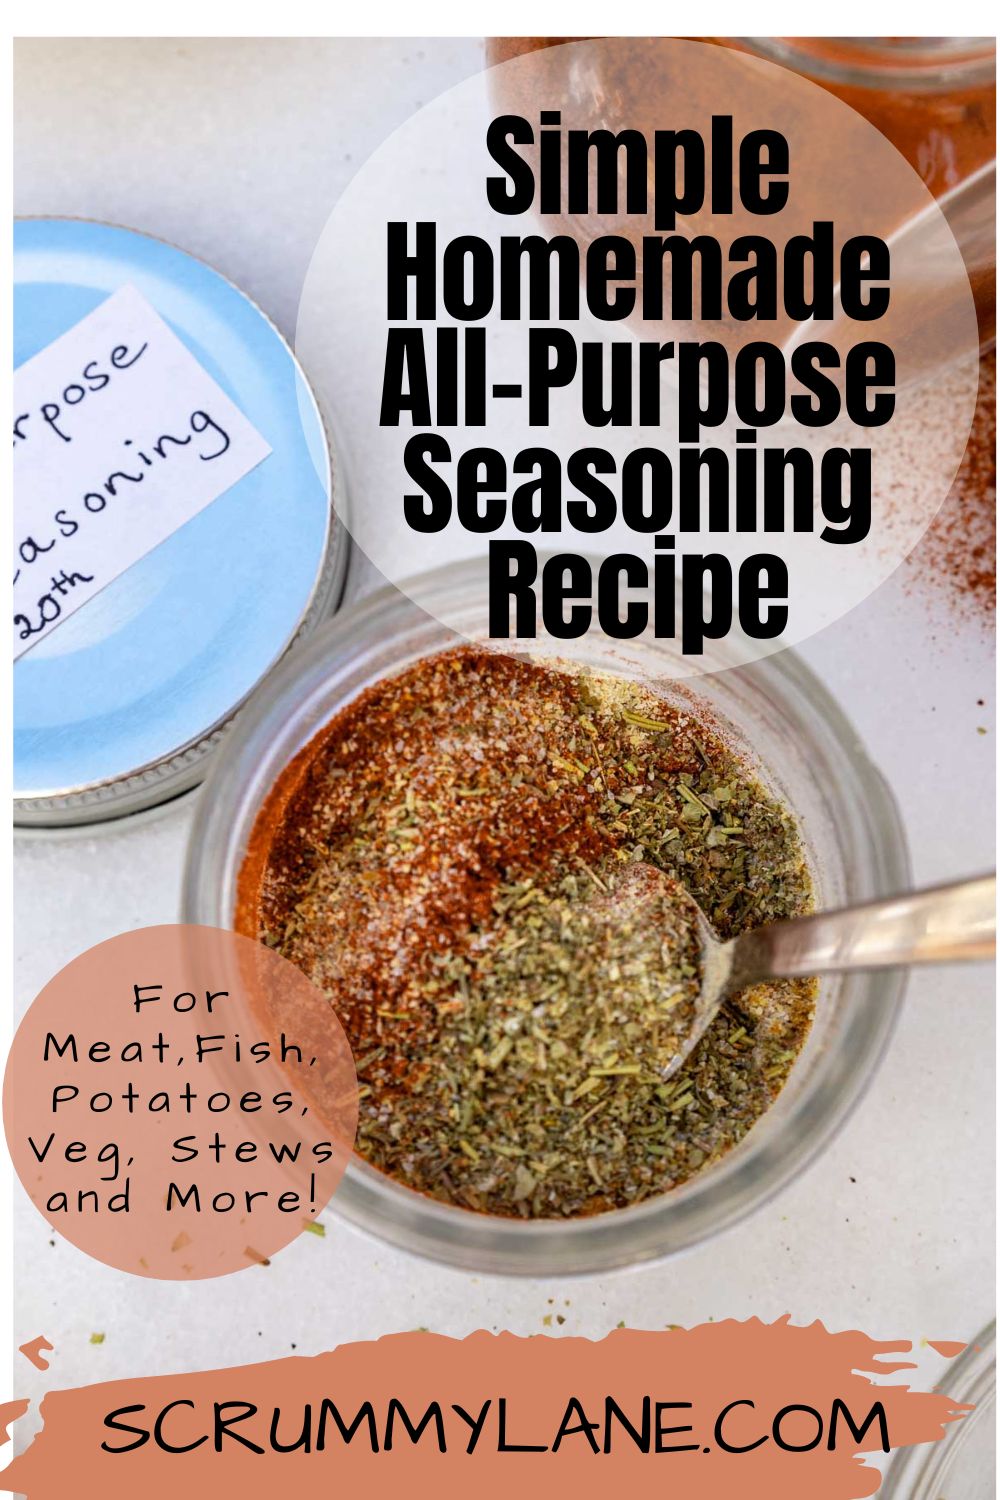 All-purpose seasoning in a small glass jar with a spoon in it and a title on the image for Pinterest.